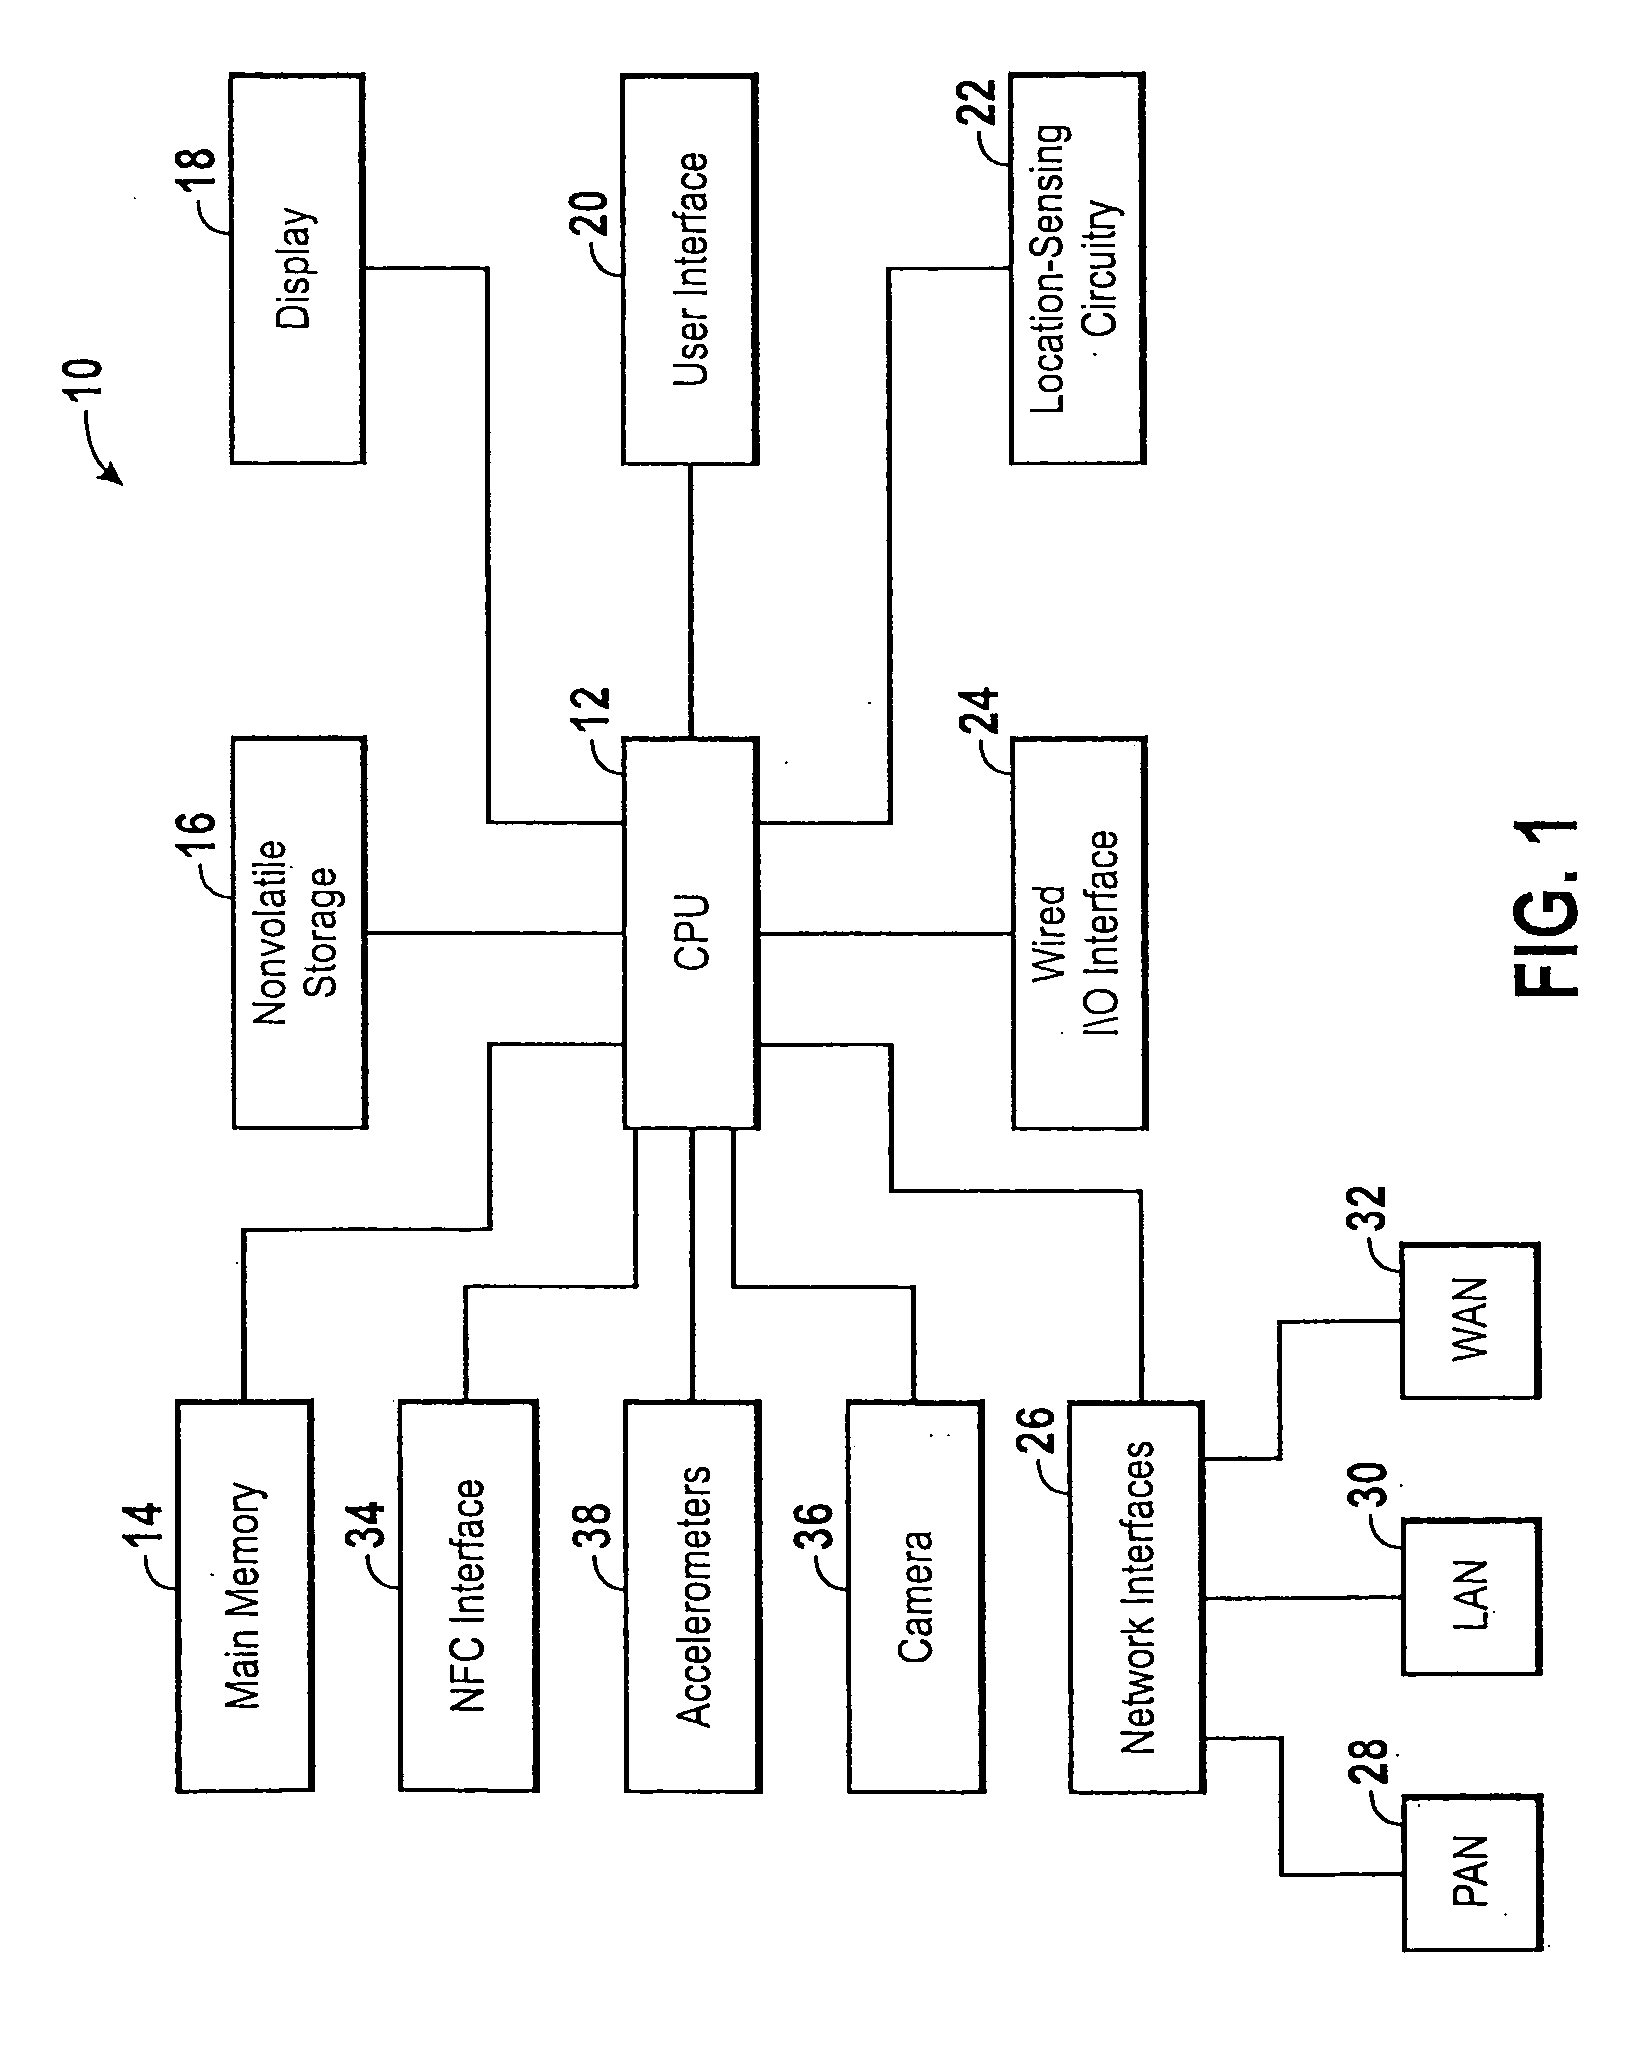 System and method for providing electronic event tickets